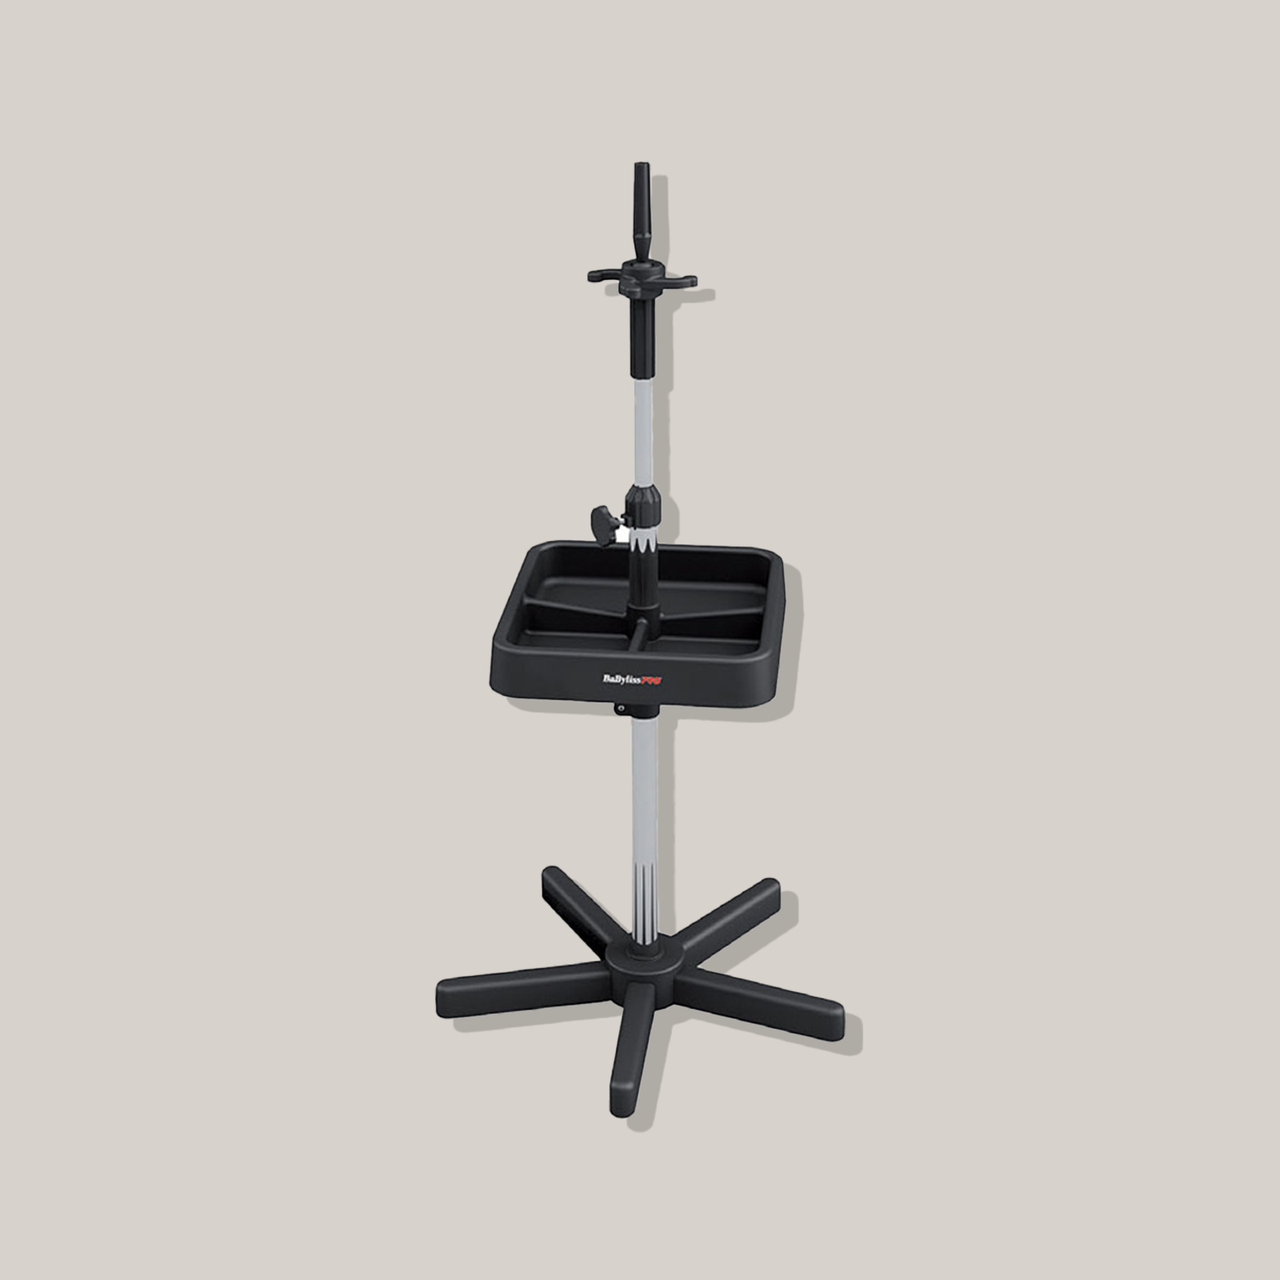 Babylisspro Mannequin tripod with tray #BESYS38UCC 